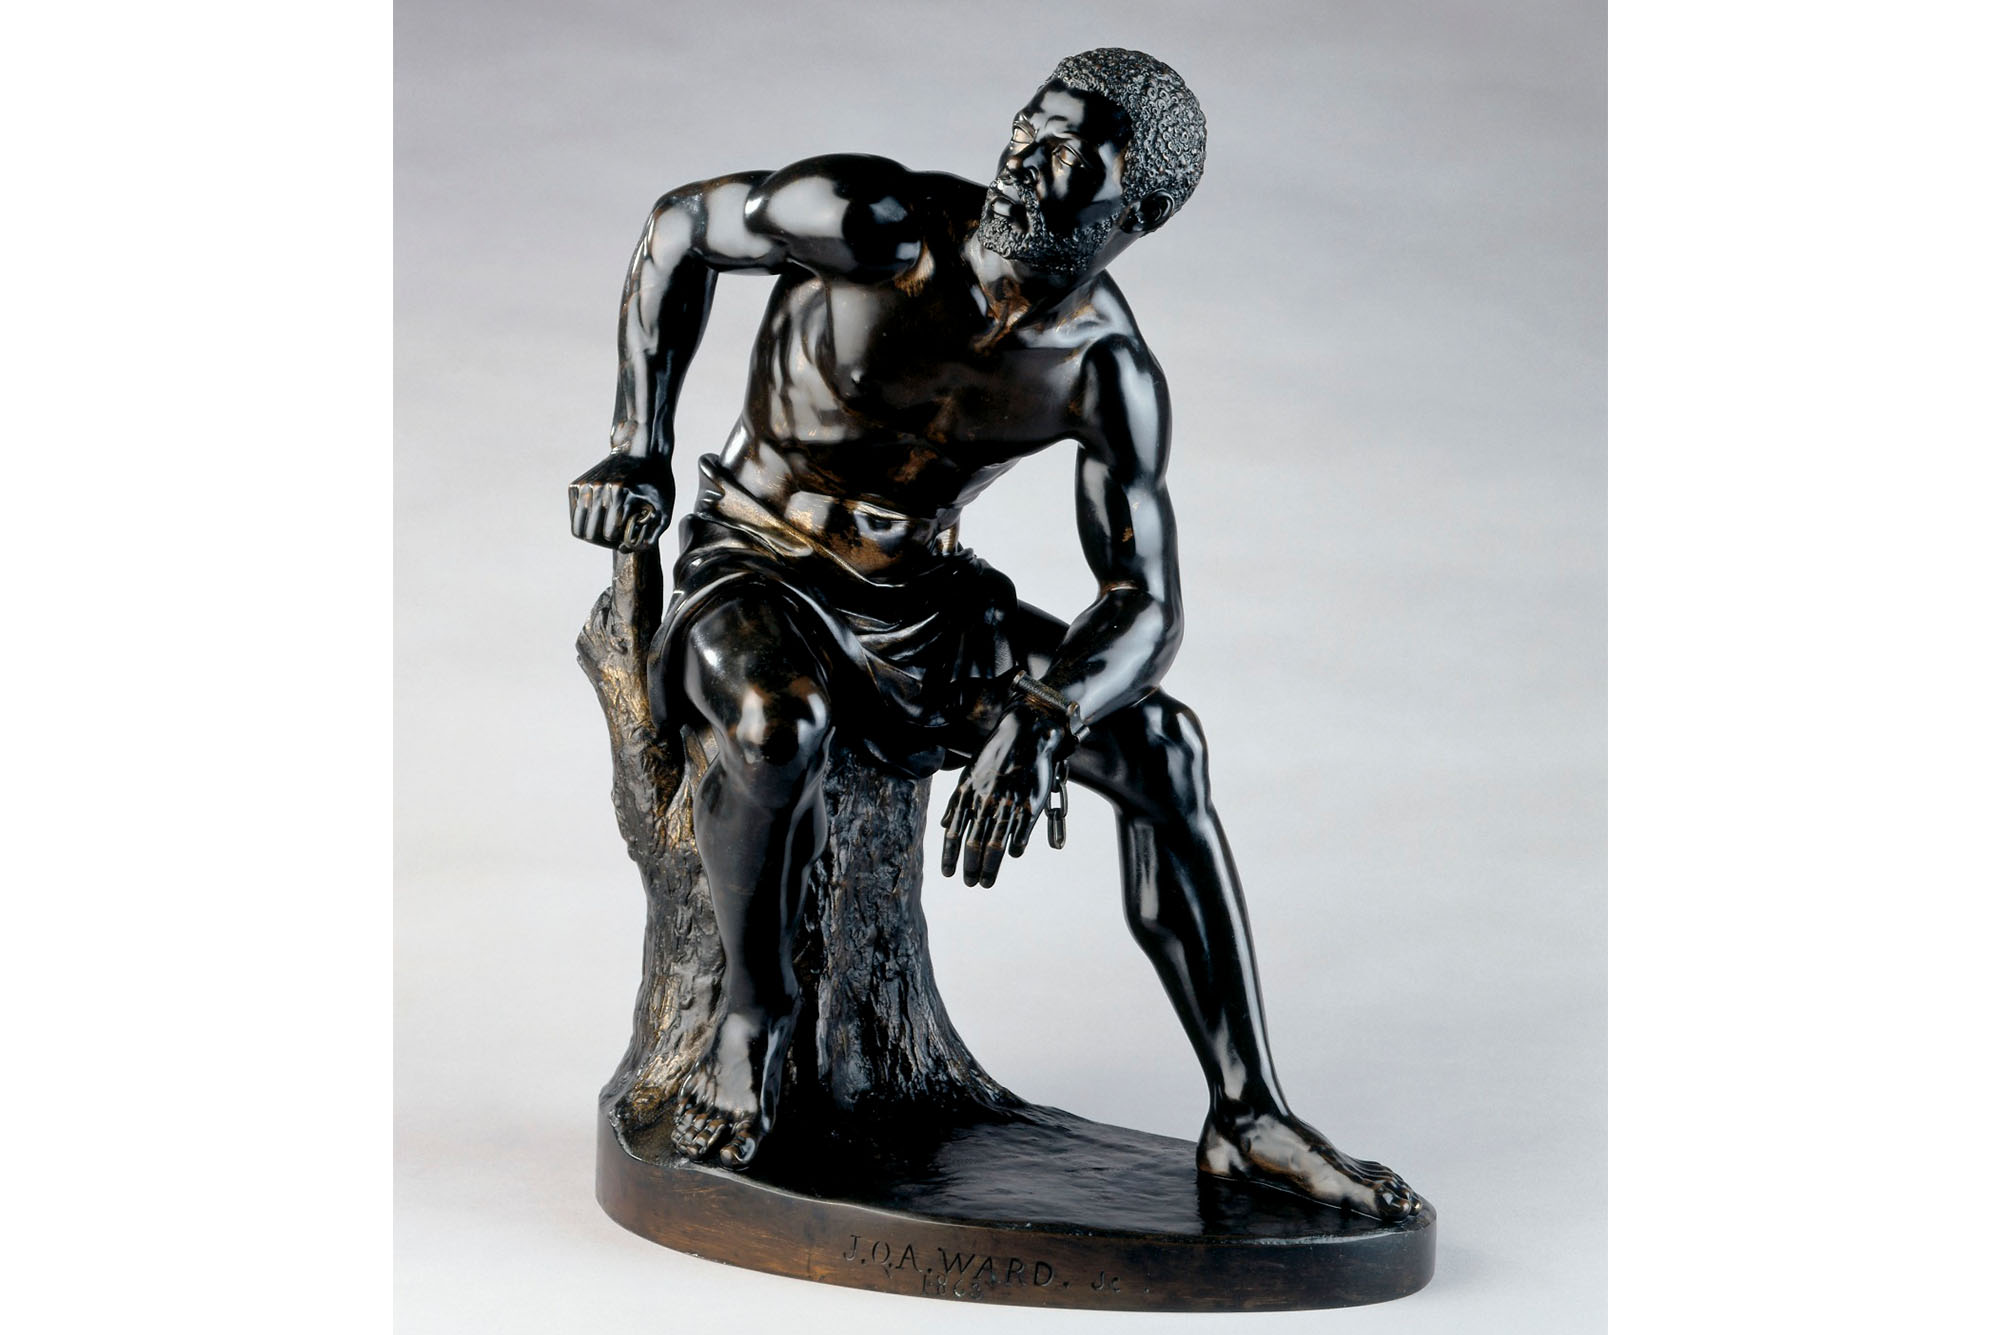 John Quincy Adams Ward's The Freedman, a bronze statue of an shirtless African American man sitting on a stump. He sits hunched over and turned slightly looking to his right with his right hand on the stump. On his left wrist is a single handcuff, the chain dangling down.